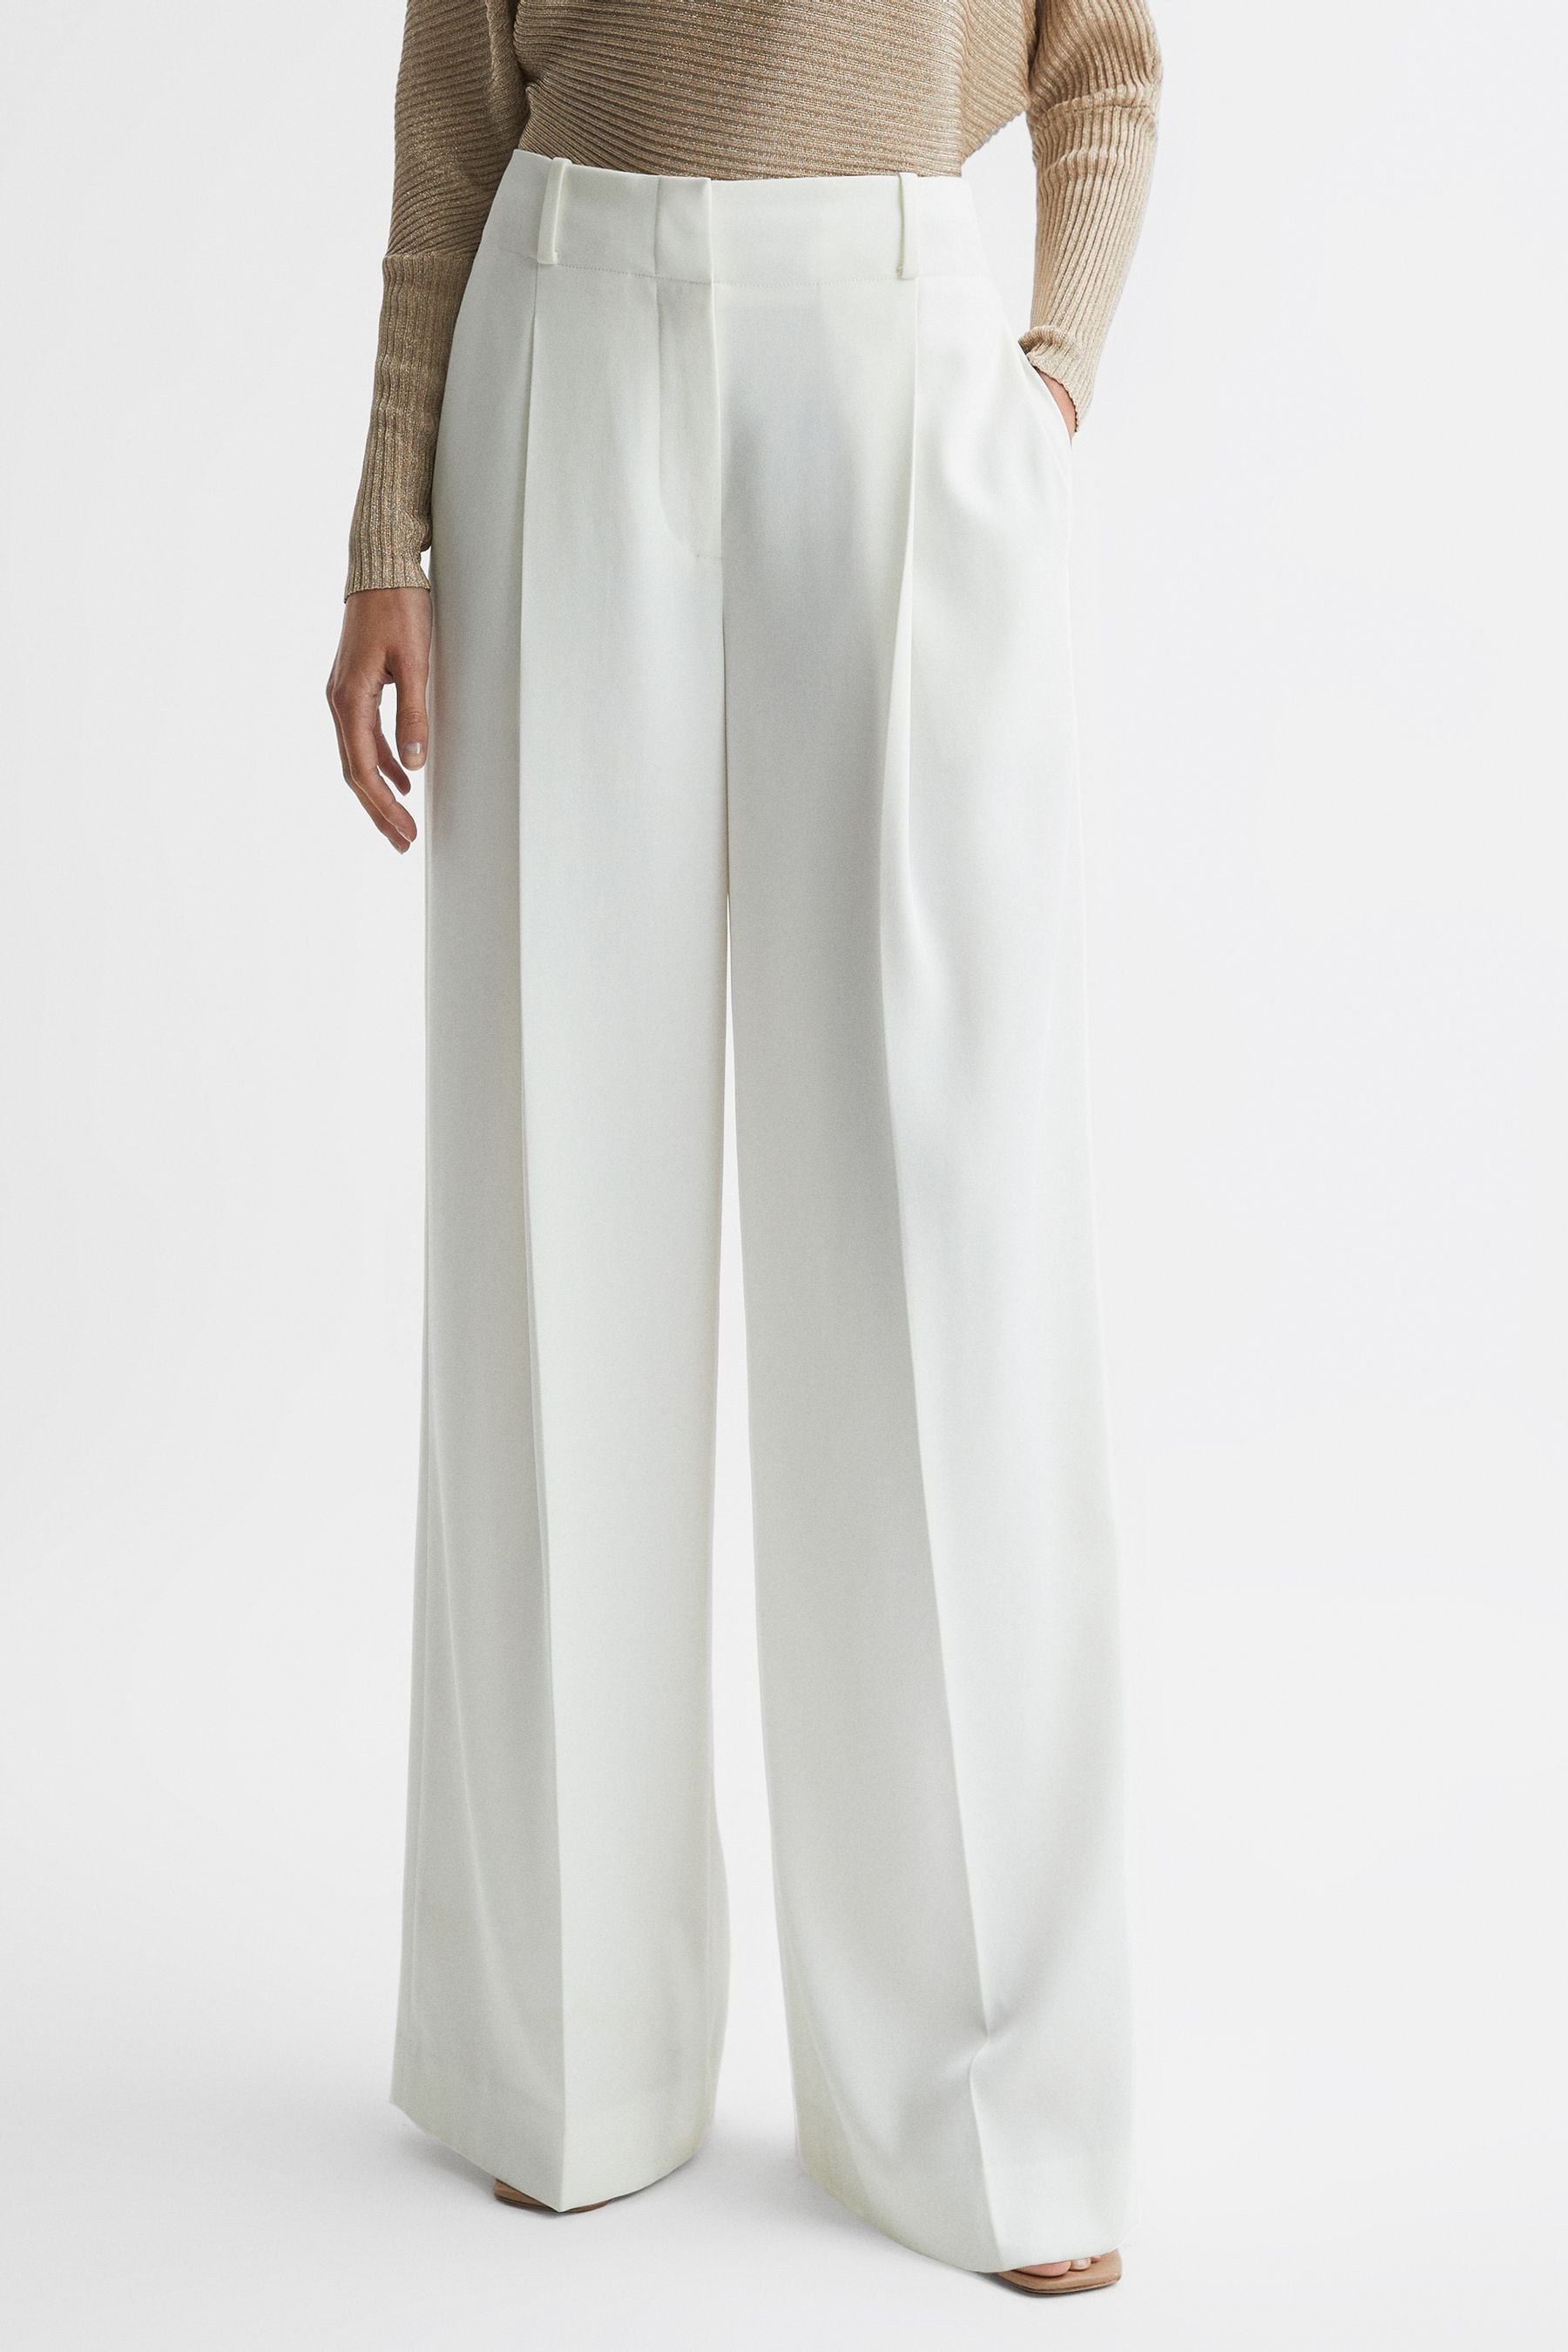 Reiss Lillie - White Mid Rise Wide Leg Trousers, Us 2